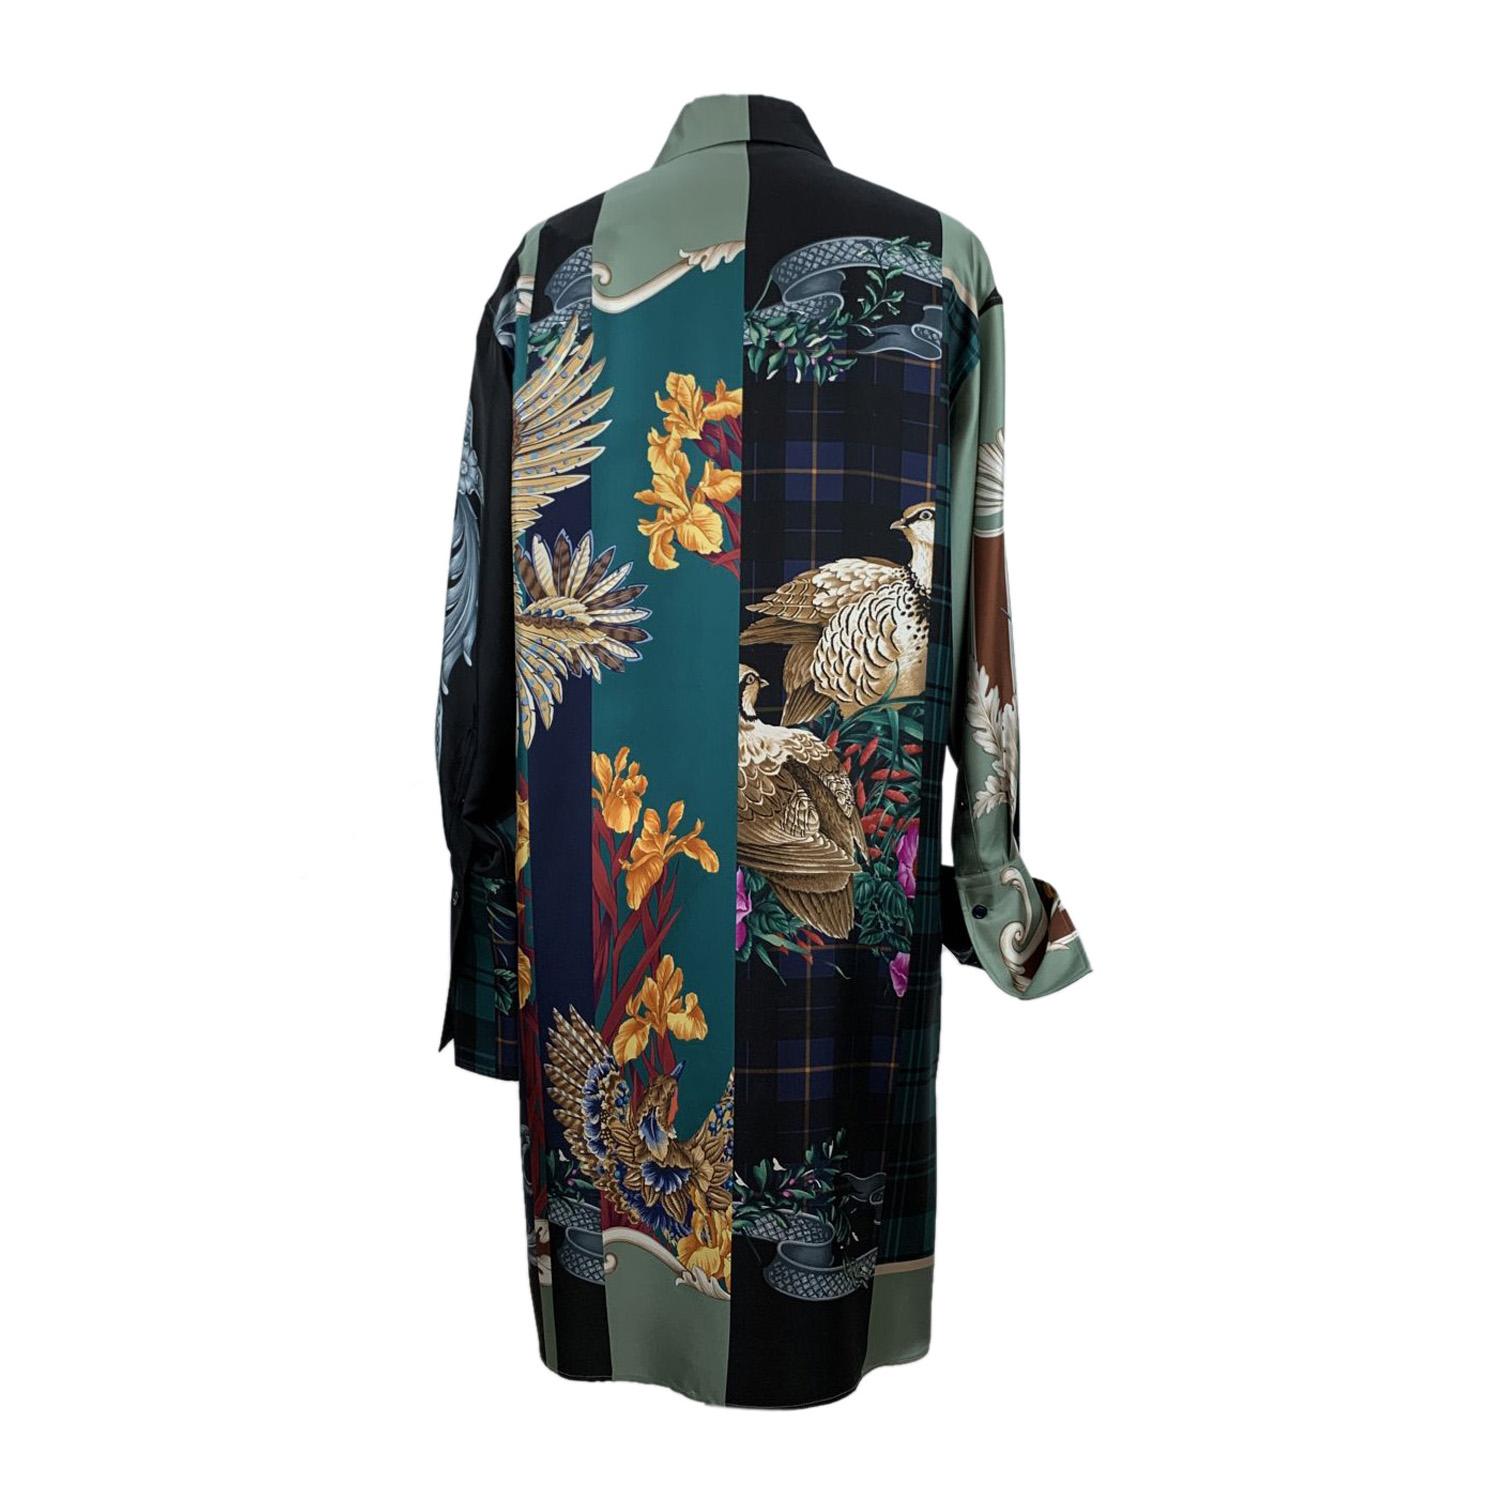 Salvatore Ferragamo multicolor patchwork printed long-line shirt. Pointed collar. Long sleeve styling with buttoned cuffs. Button placket. Side slits. Composition: 100% silk. Can also be used as a dress. Size: 40 IT (The size shown for this item is